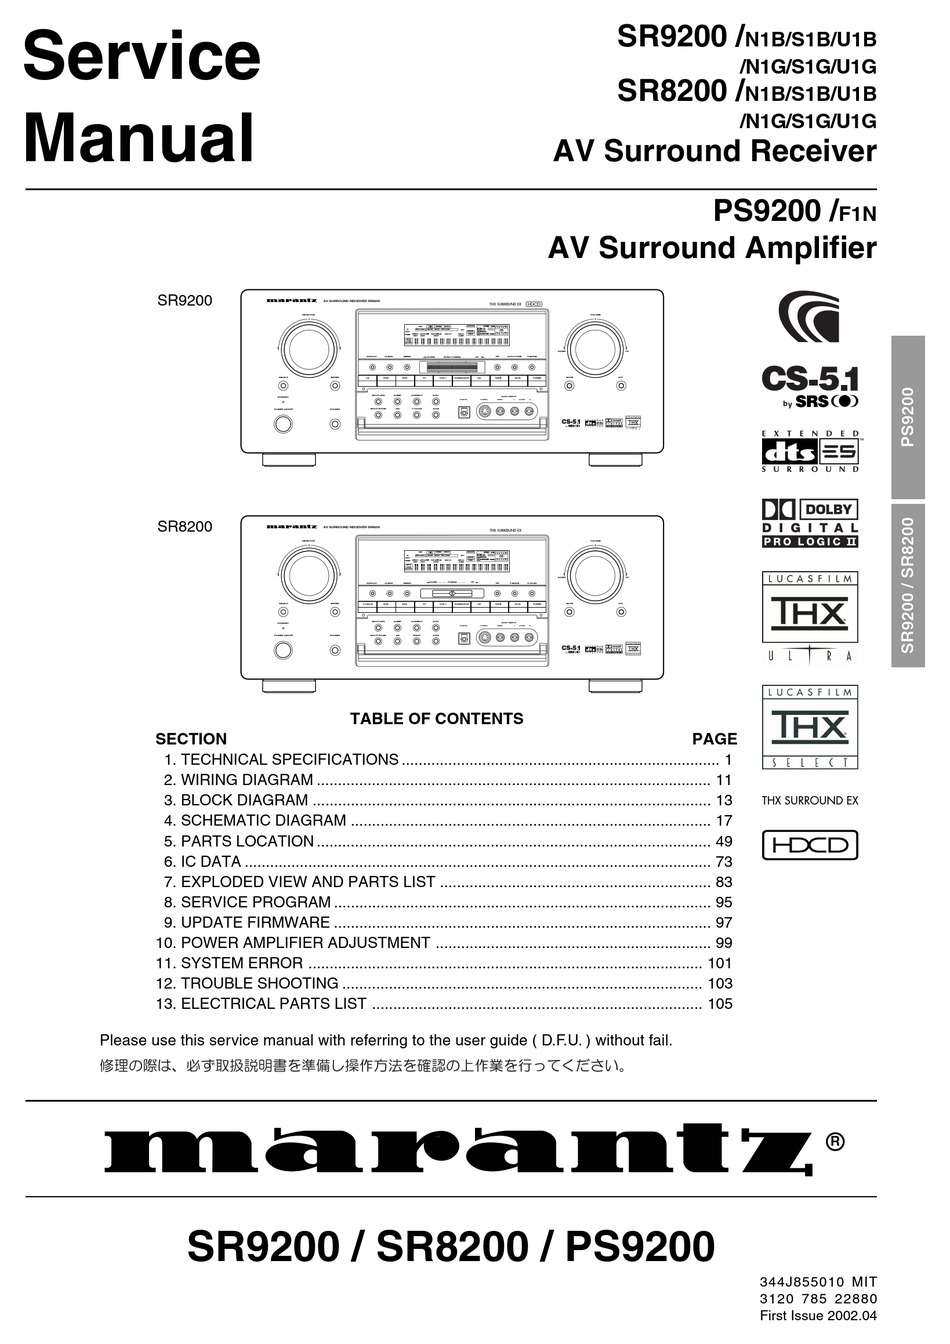 MARANTZ SR9200 OWNERS MANUAL ALL 53 PAGES  ON A CD IN A HARD CASE FREE SHIPPING